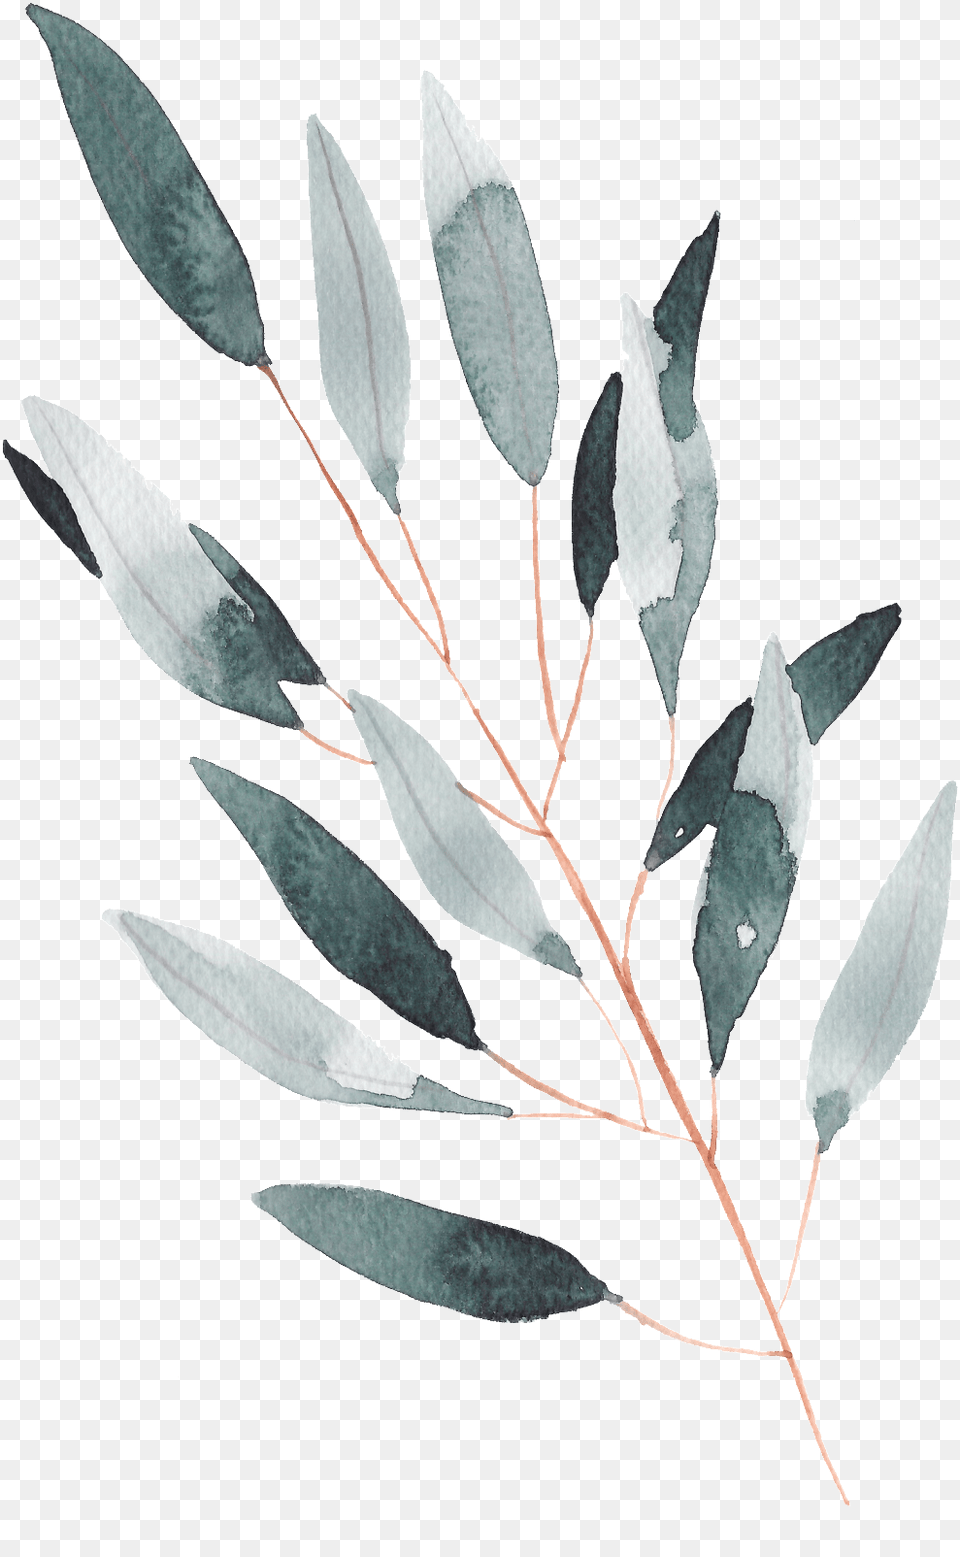 Hand Painted A Leaf Watercolor Transparent Watercolor Leaves Transparent Bg, Tree, Plant, Herbs, Herbal Png Image